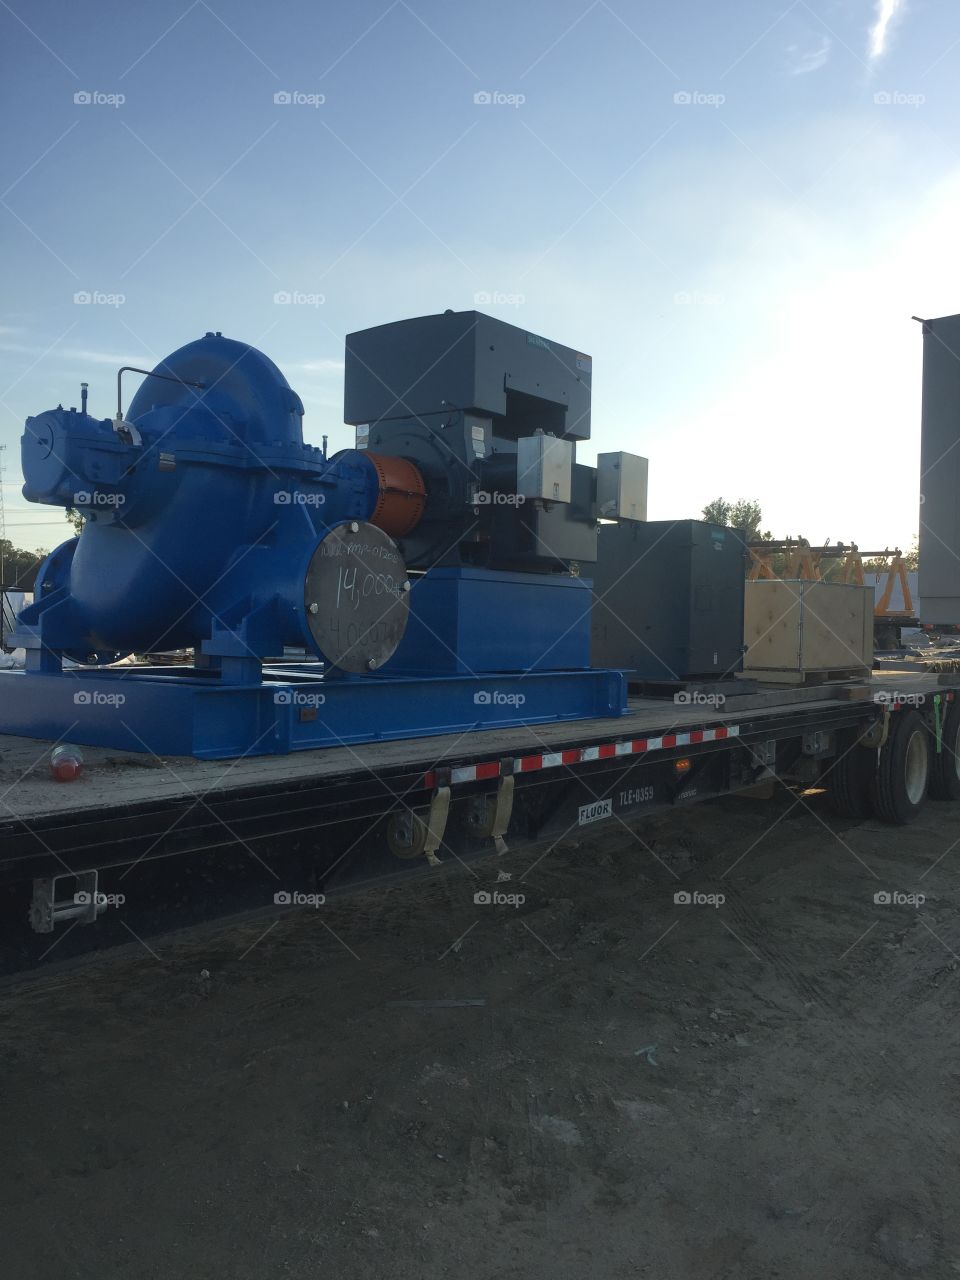 Crystal River, Florida, LNG Power plant Construction Oct/2017 to Dec/2017 Flatbed trailer, how we moved construction equipment in place for the crane to grab and set in place. Large pump on trailer.